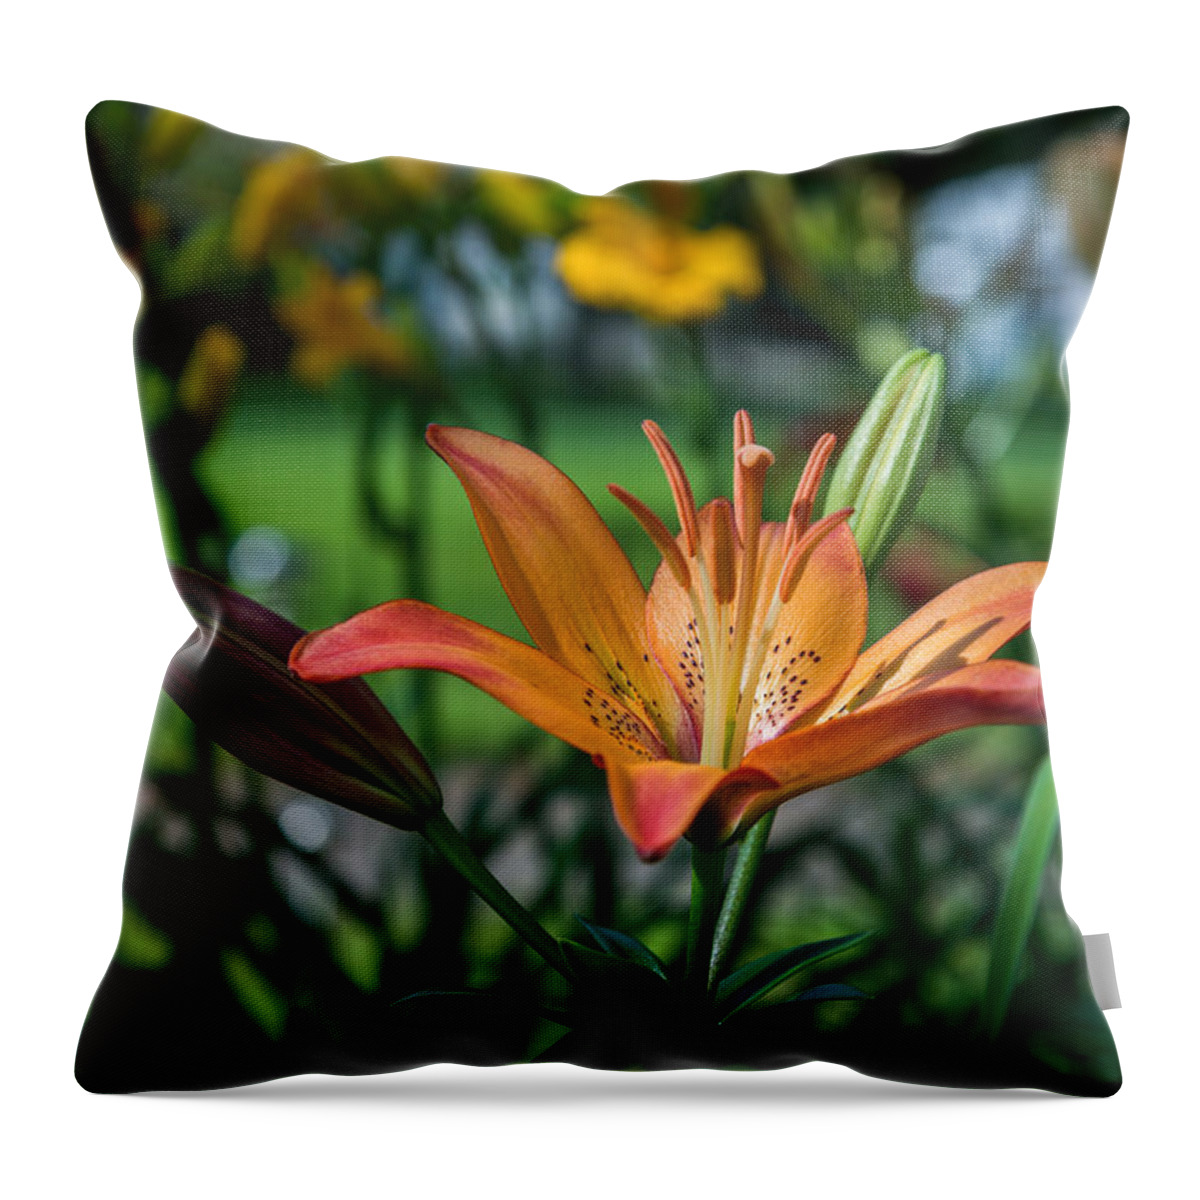 Mark Papke Throw Pillow featuring the photograph Asiatic Lily by Mark Papke